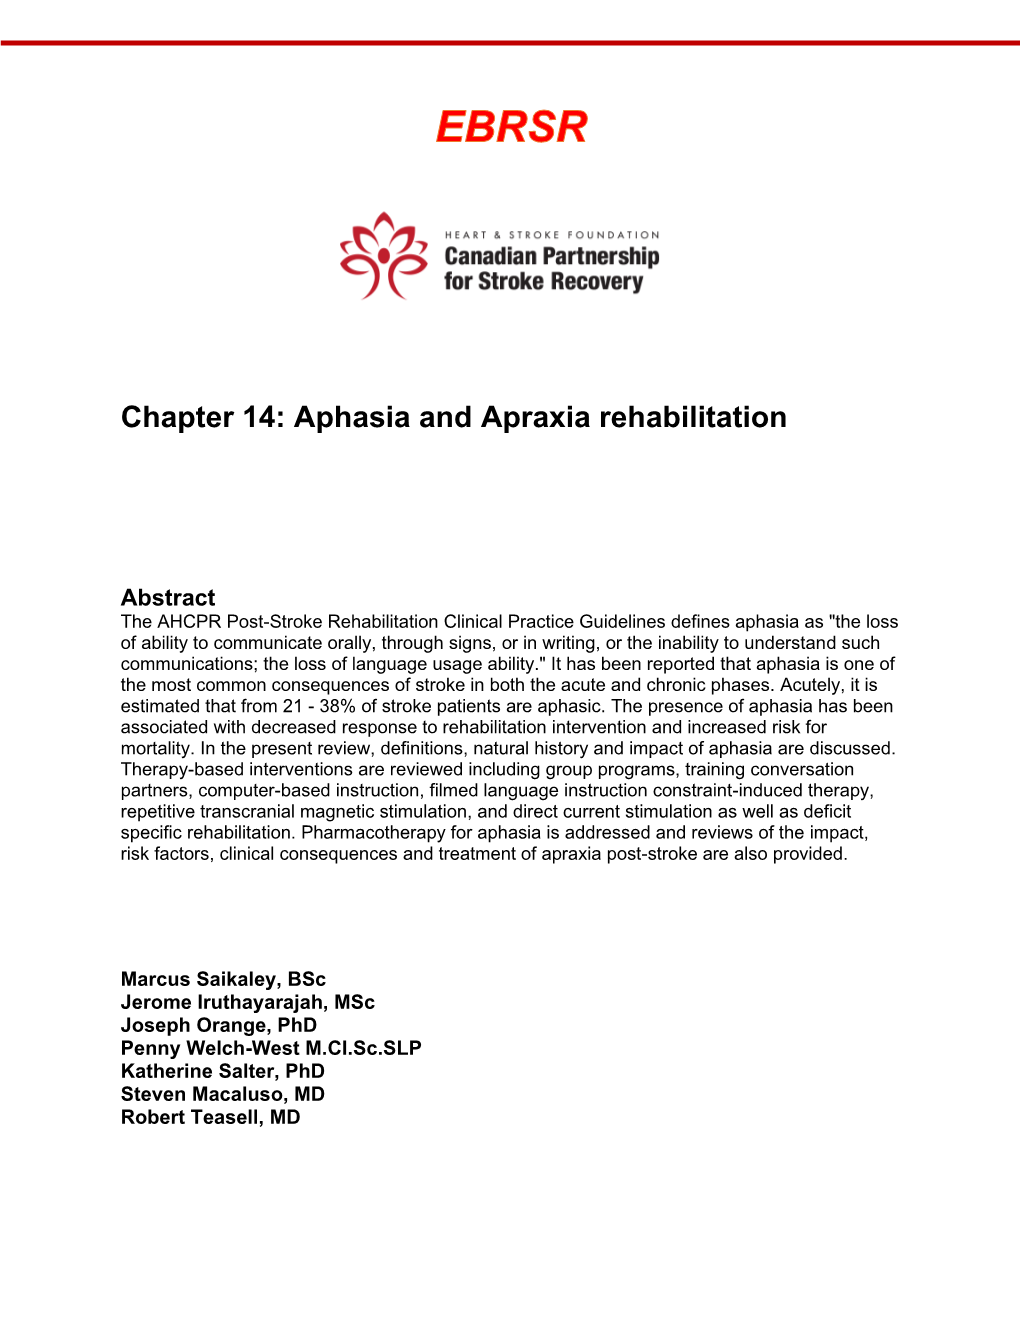 Chapter 14: Aphasia and Apraxia Rehabilitation